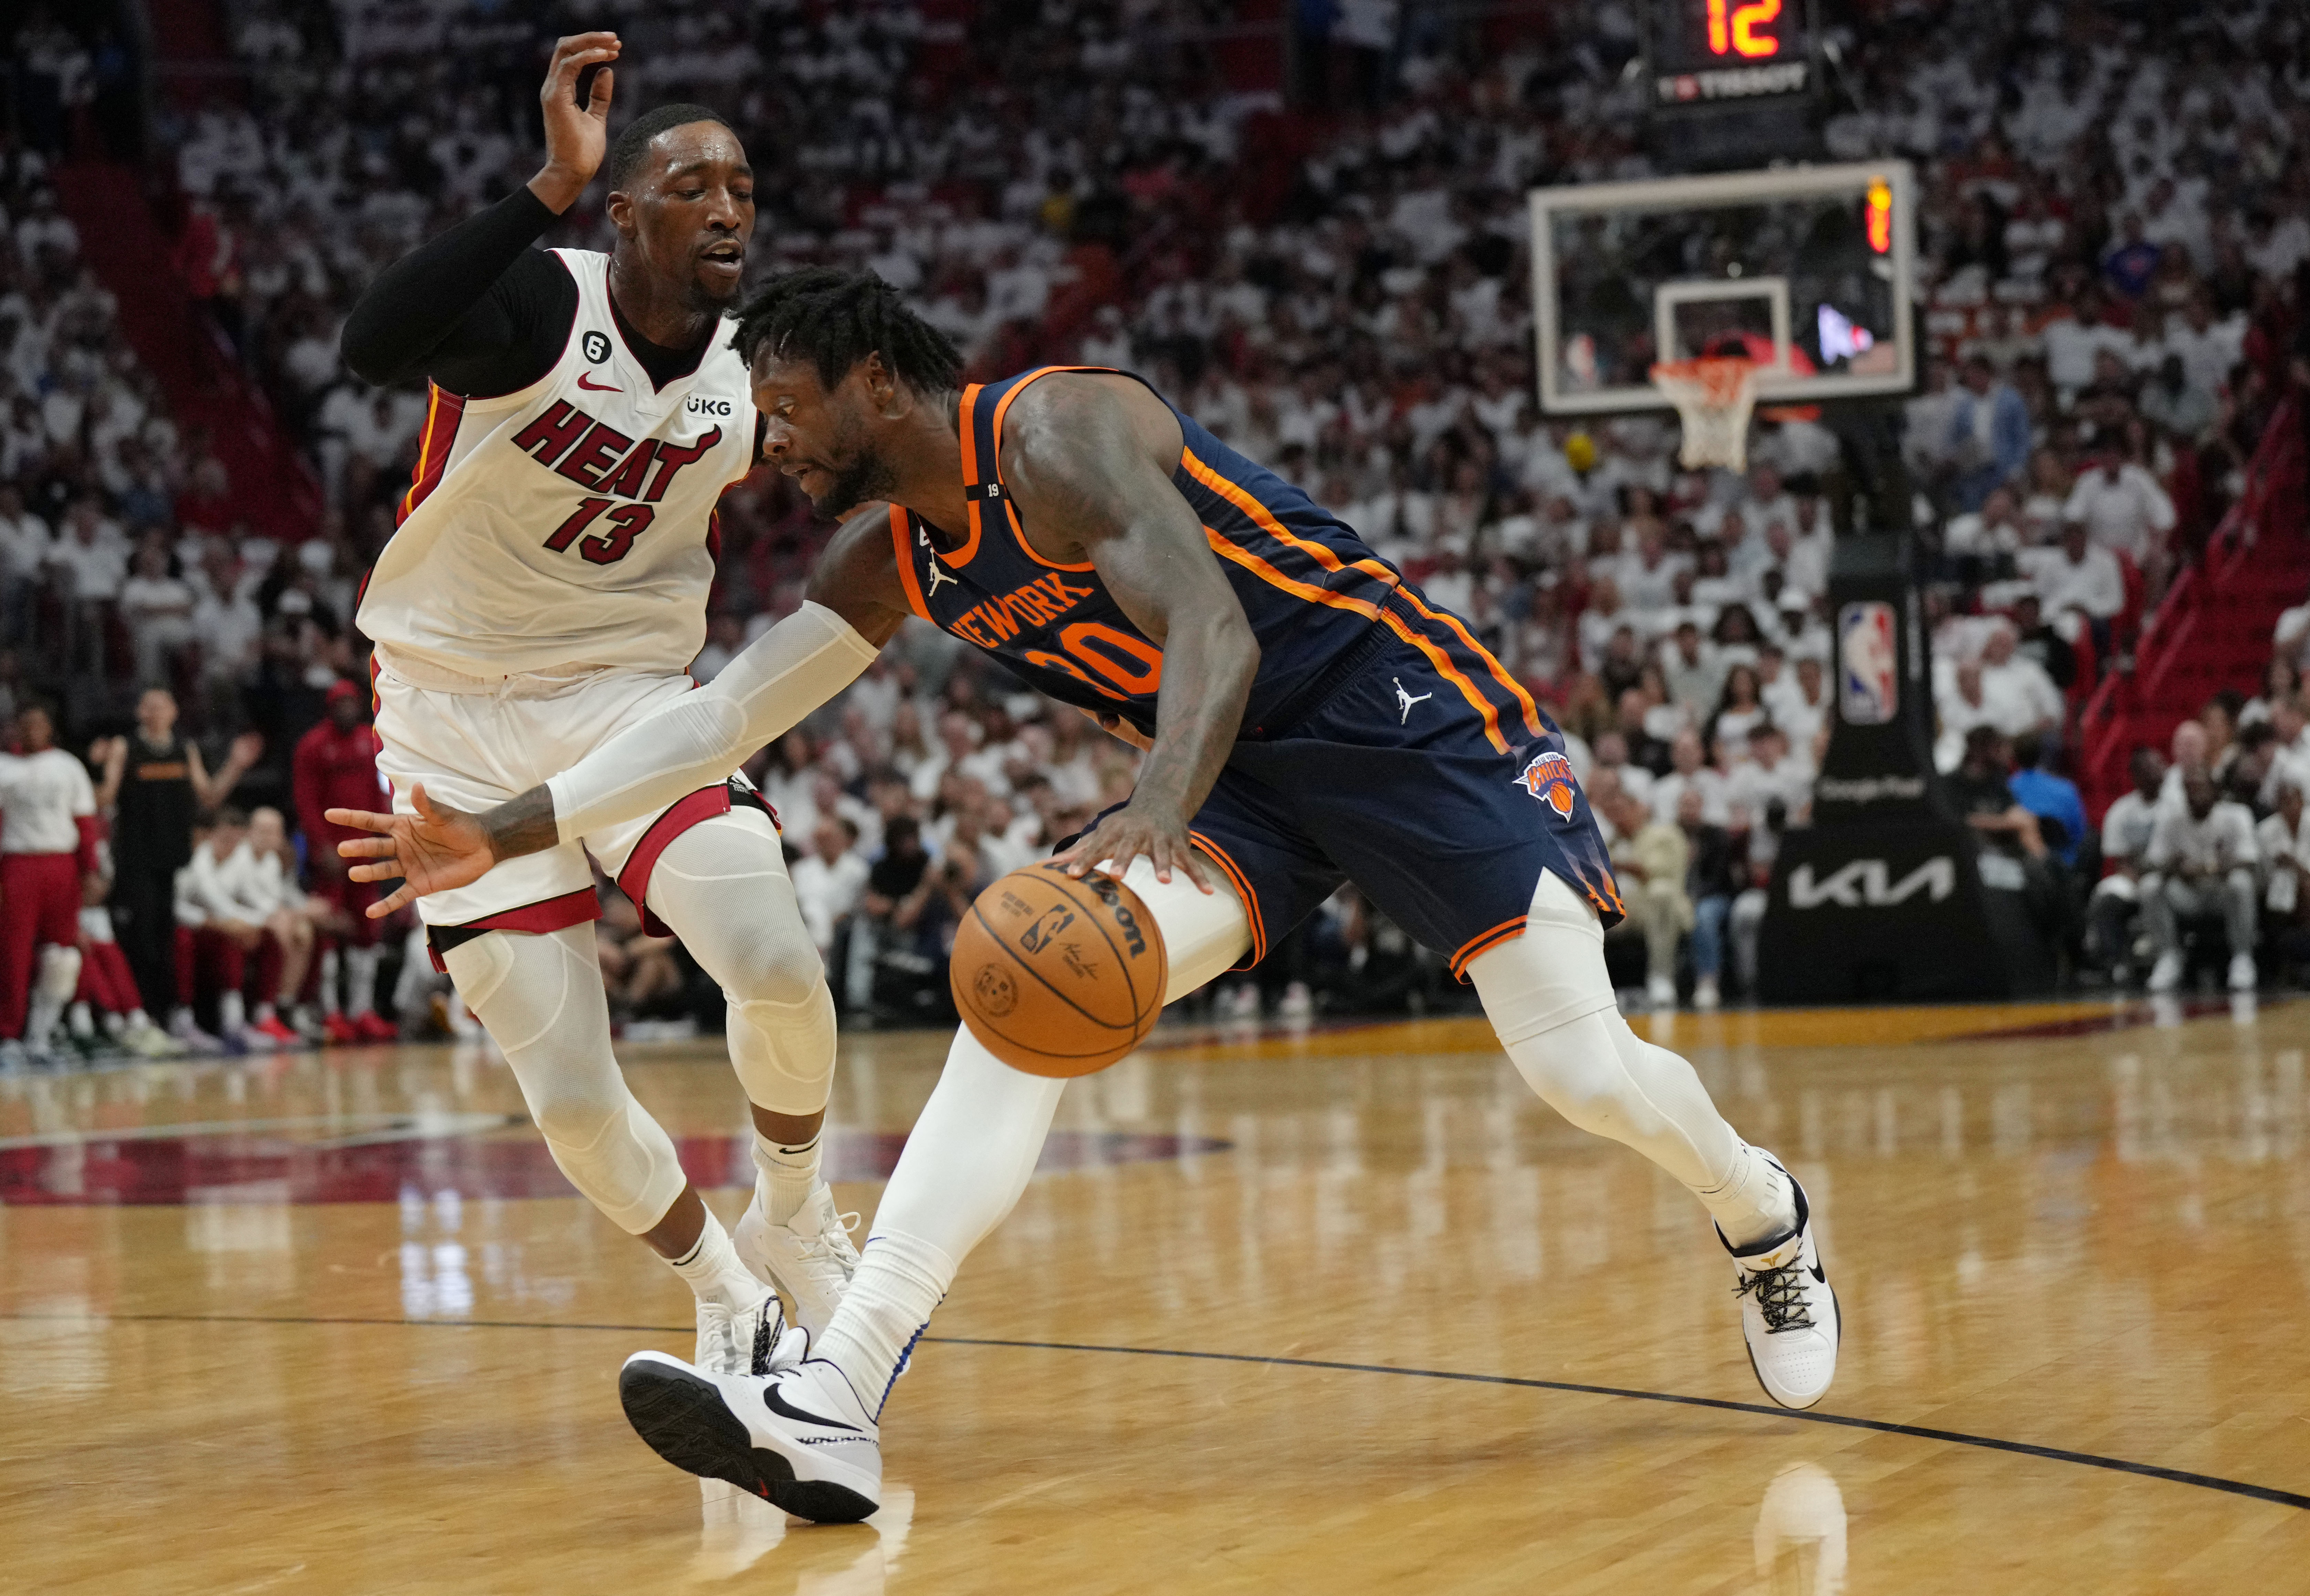 Heat close out Knicks in Game 6 to reach Eastern Conference finals